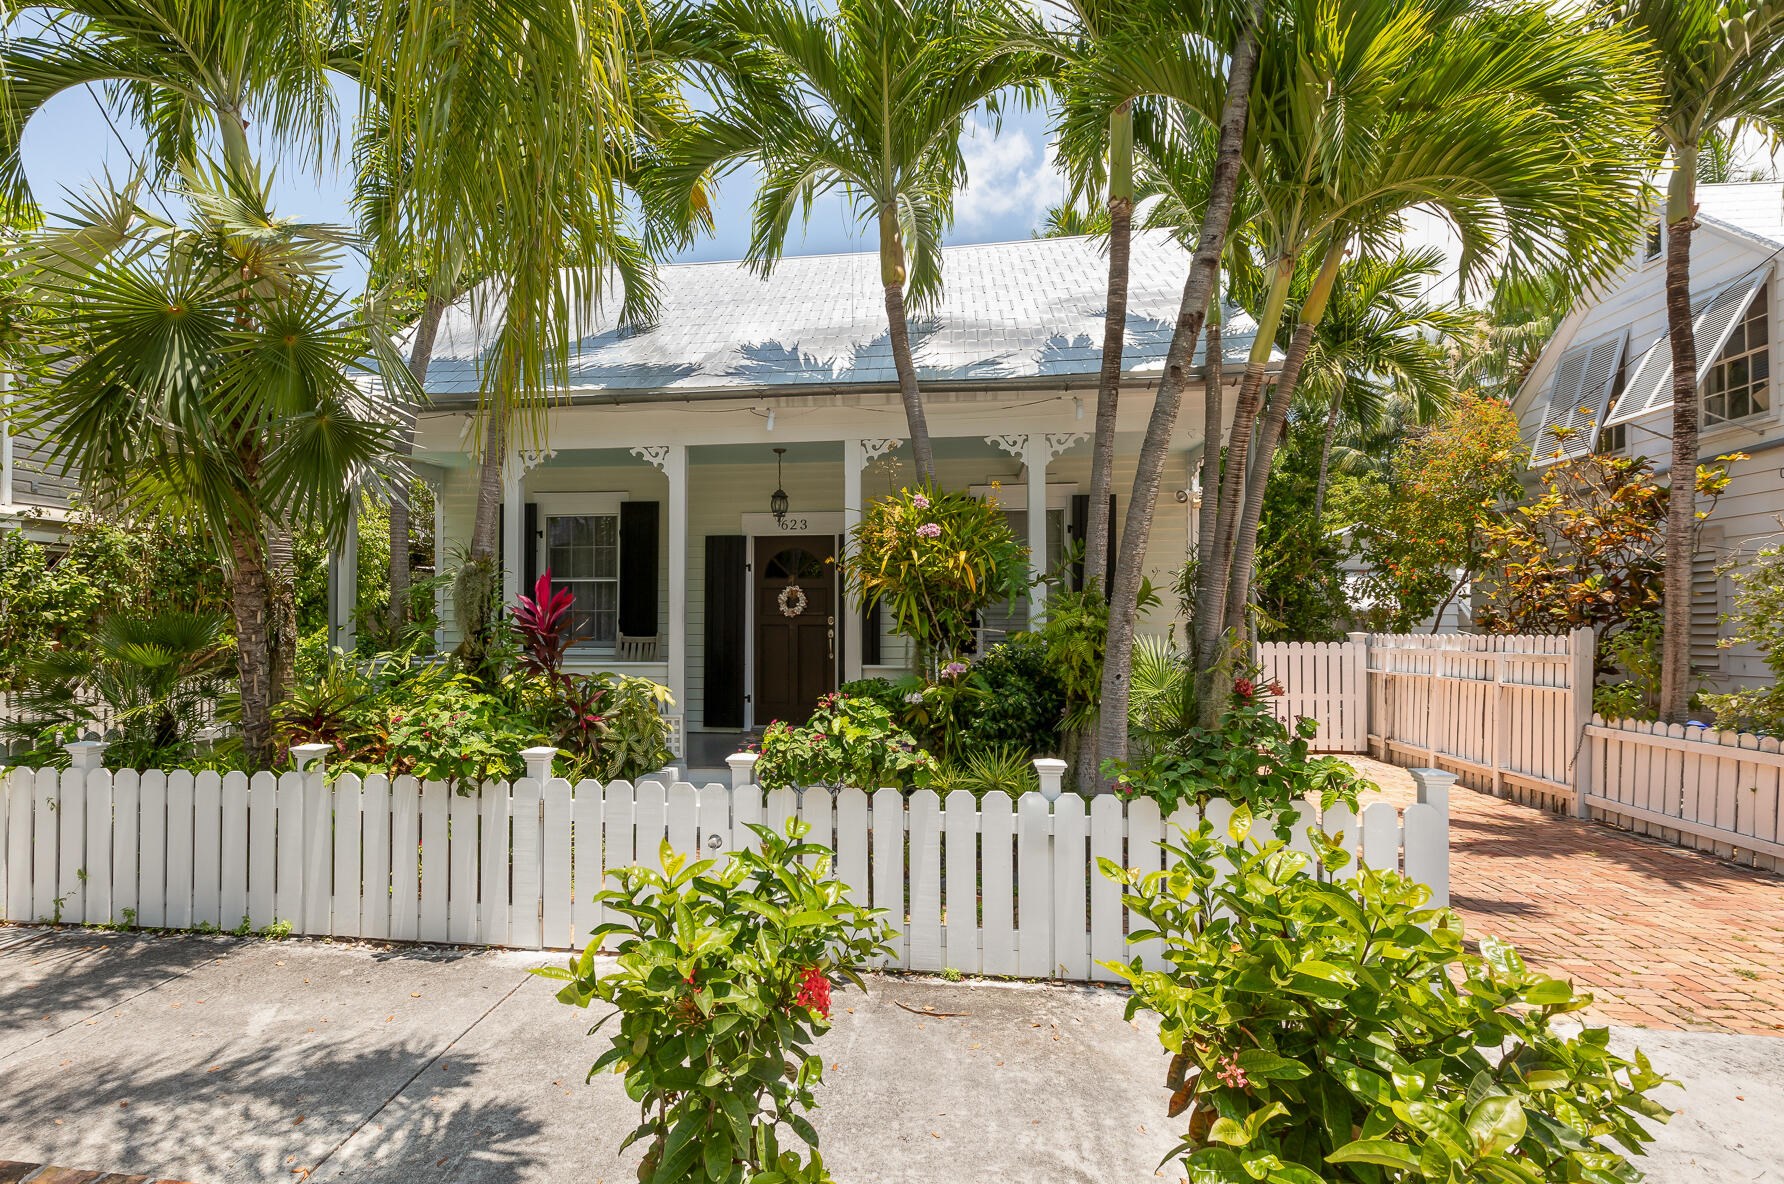 623 Grinnell St, Key West, FL 33040